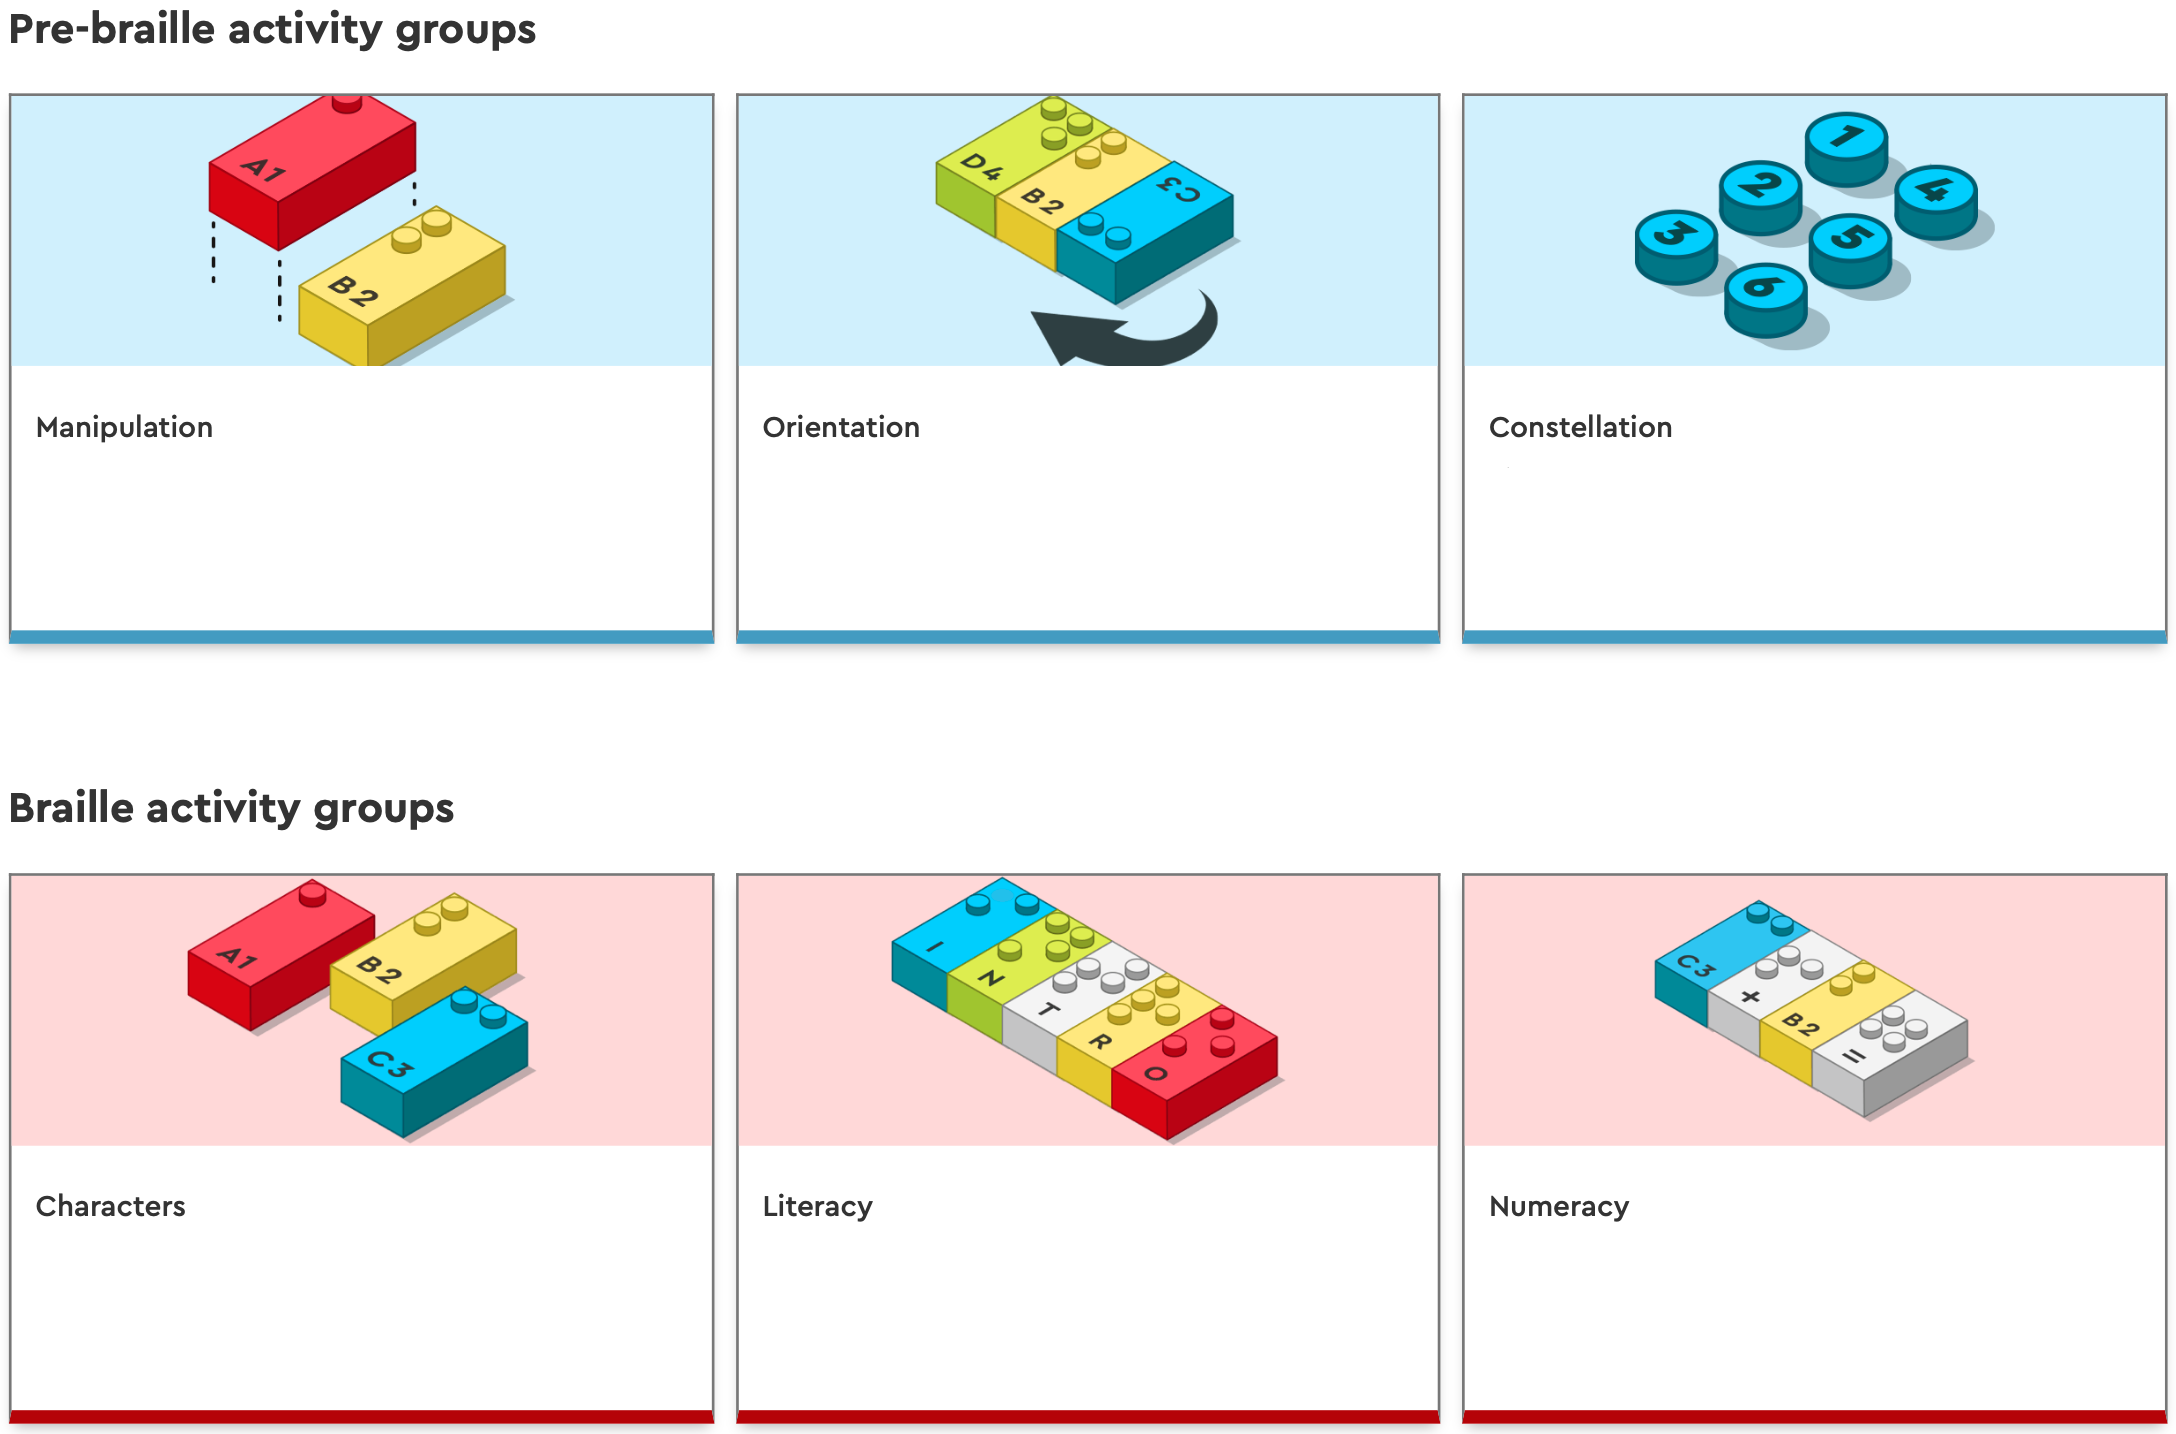 Drawings of bricks illustrating the six categories of pre-braille and braille categories